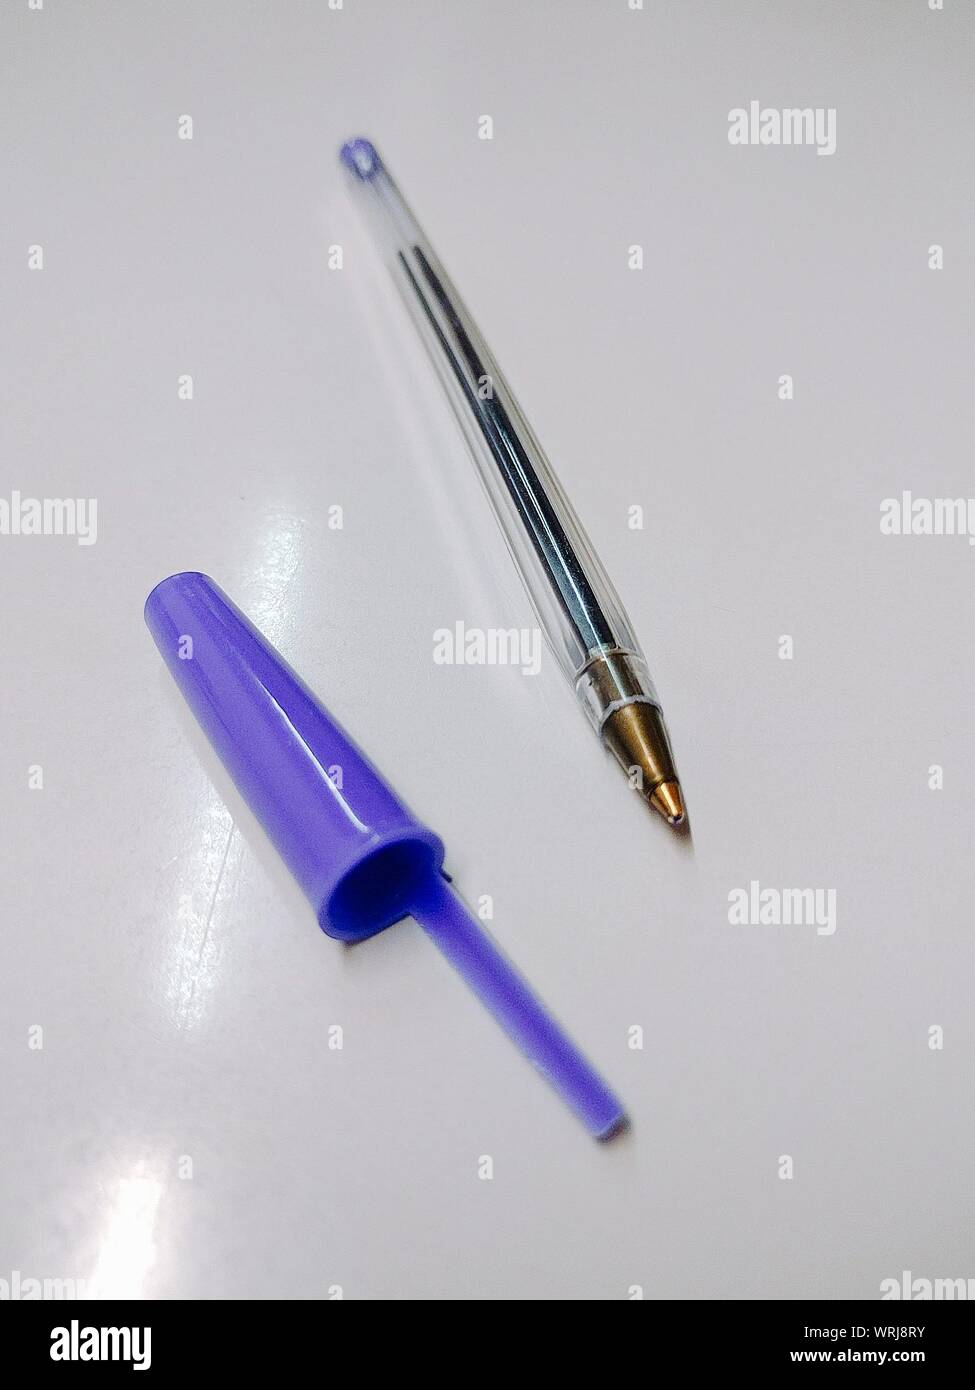 Pen Cap High Resolution Stock Photography and Images - Alamy